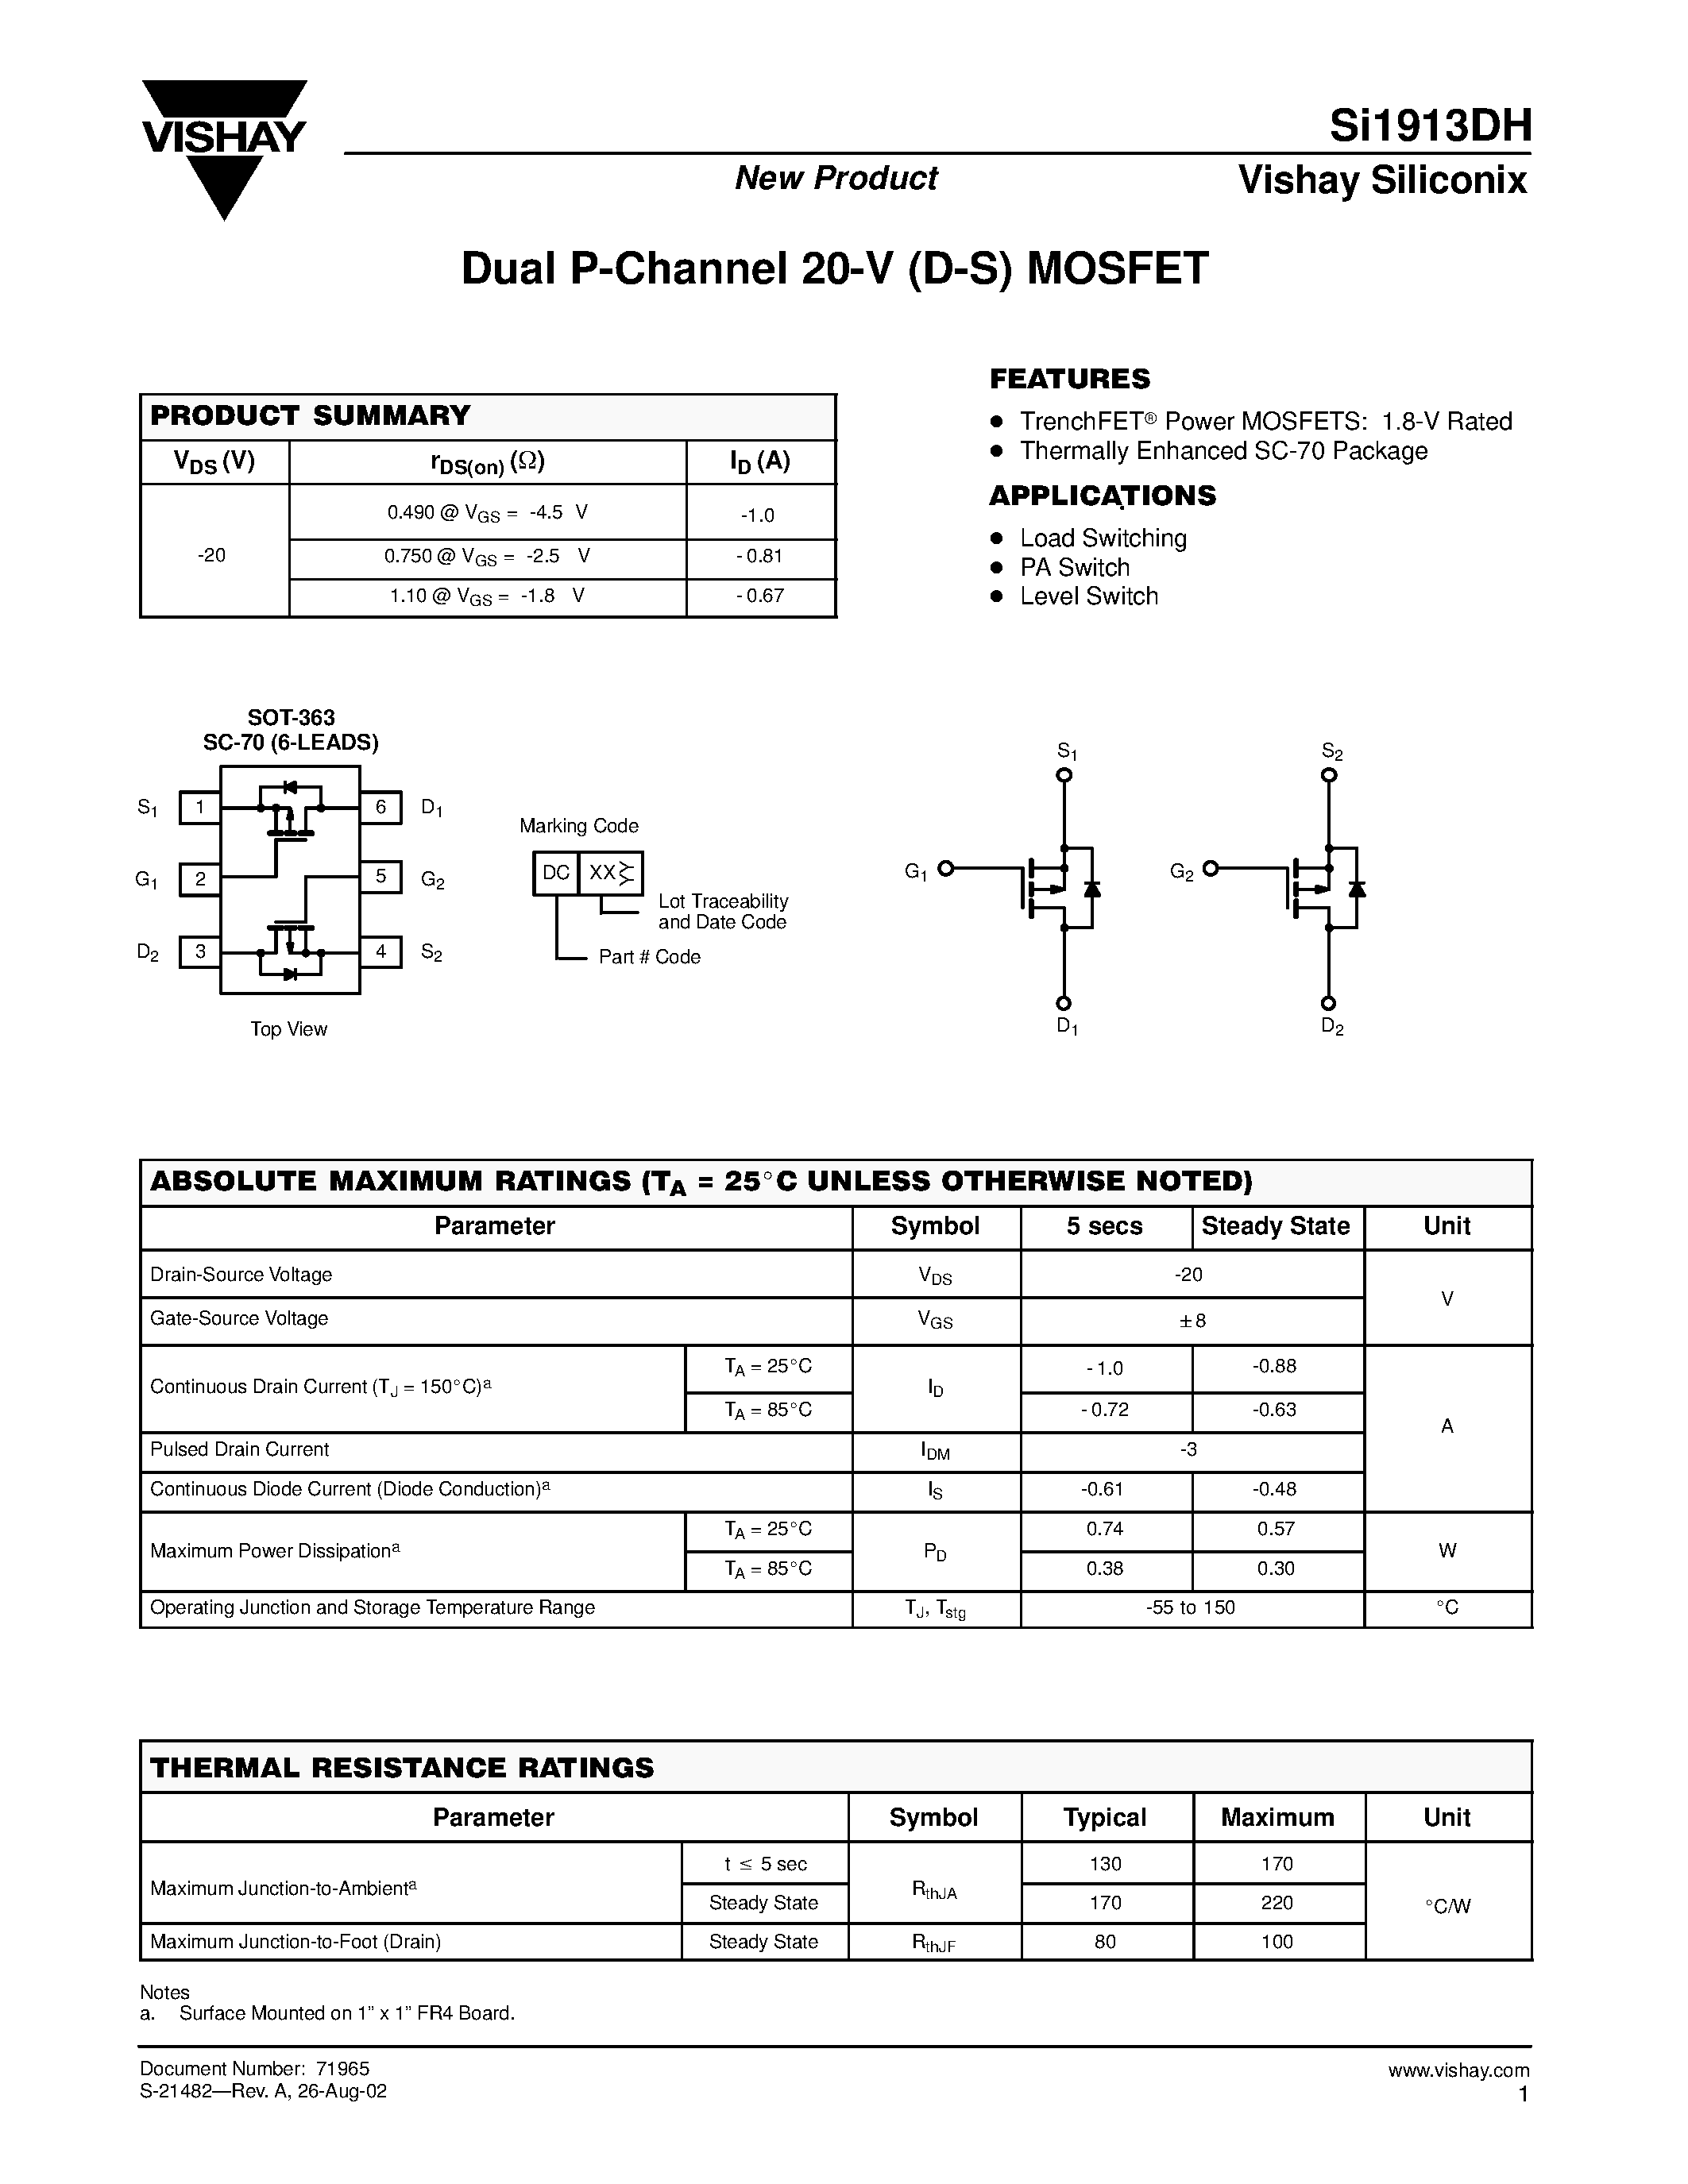 Даташит SI1913DH - Dual P-Channel 20-V (D-S) MOSFET страница 1